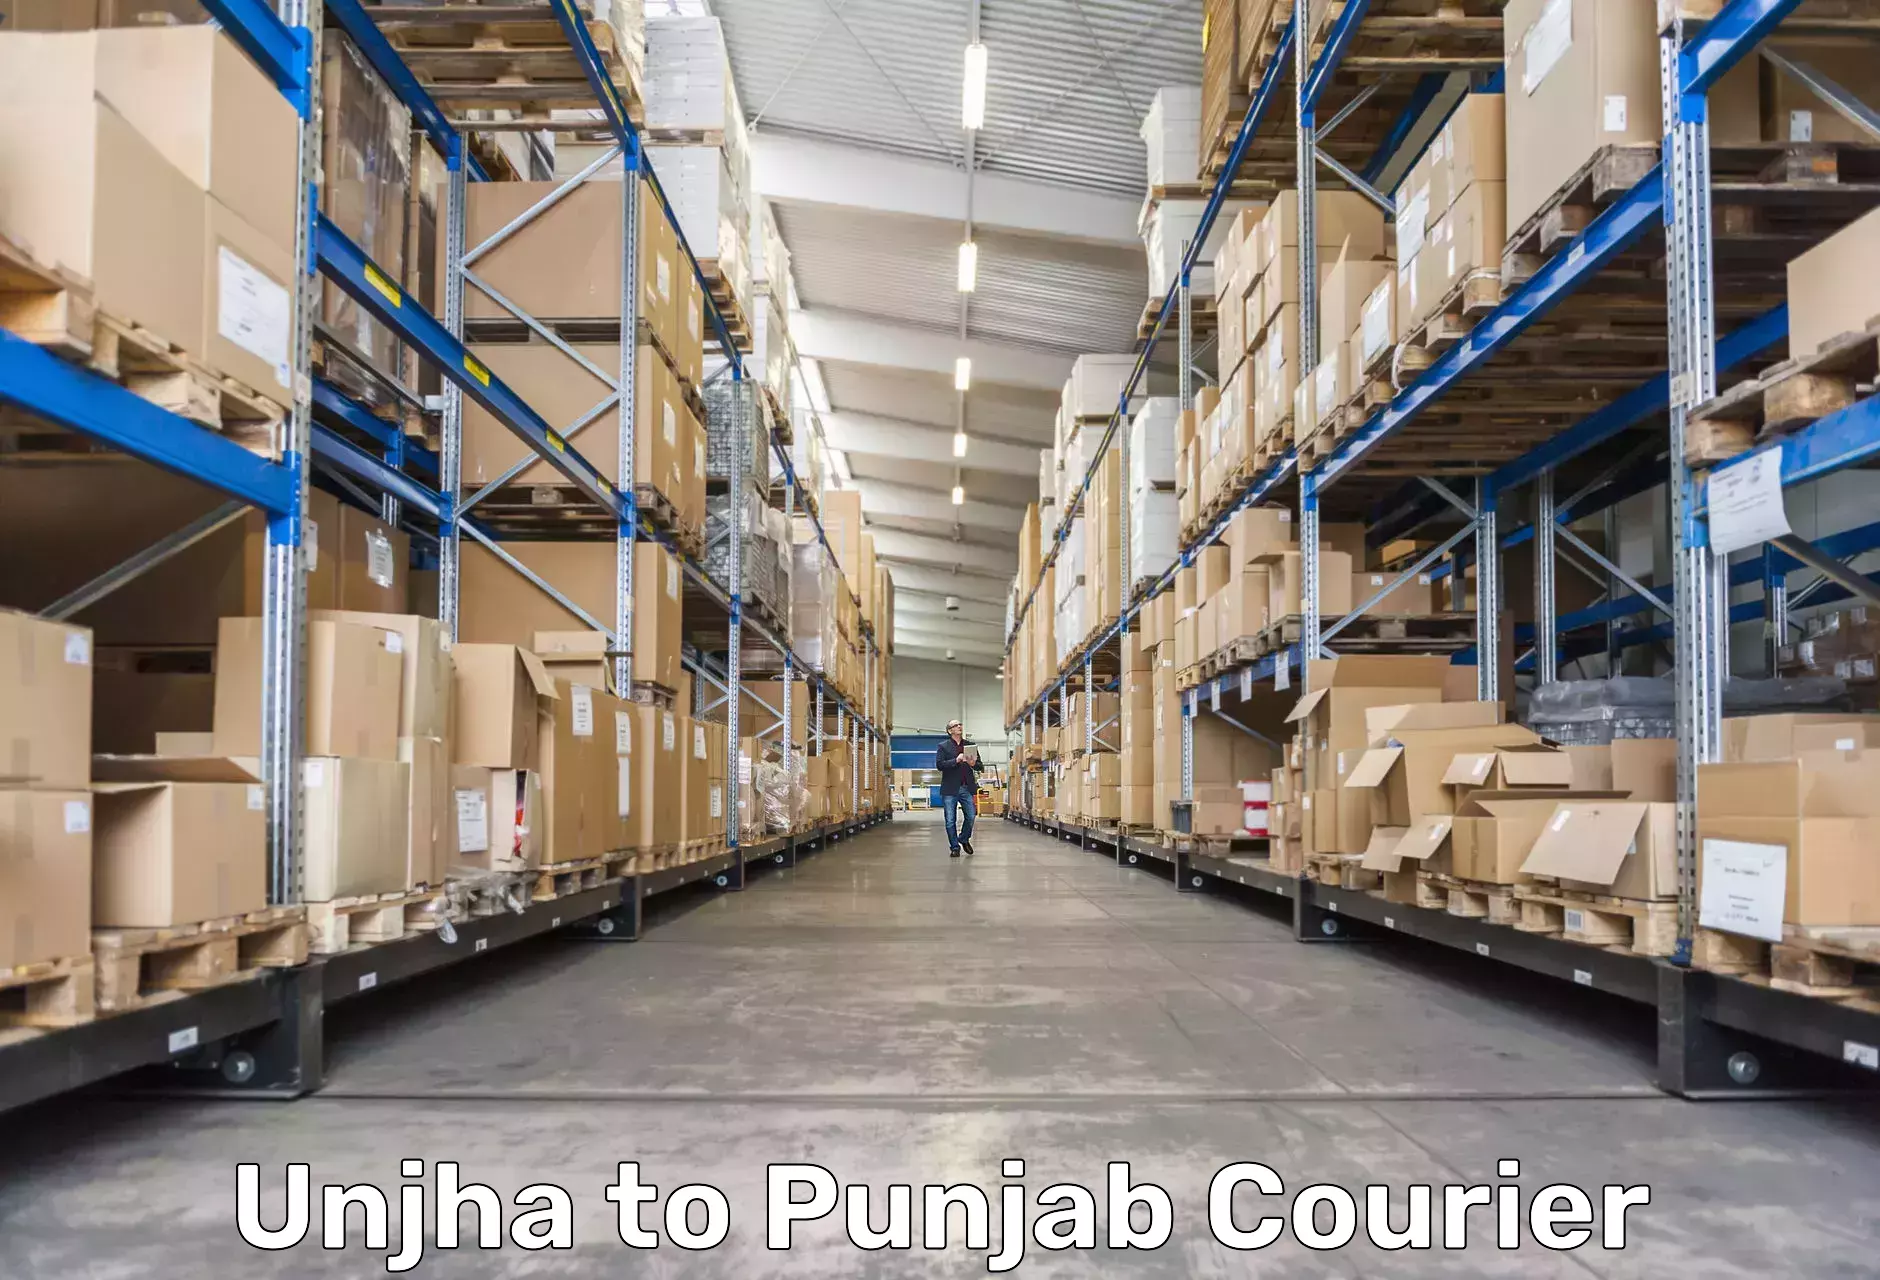 Personal courier services in Unjha to Patiala